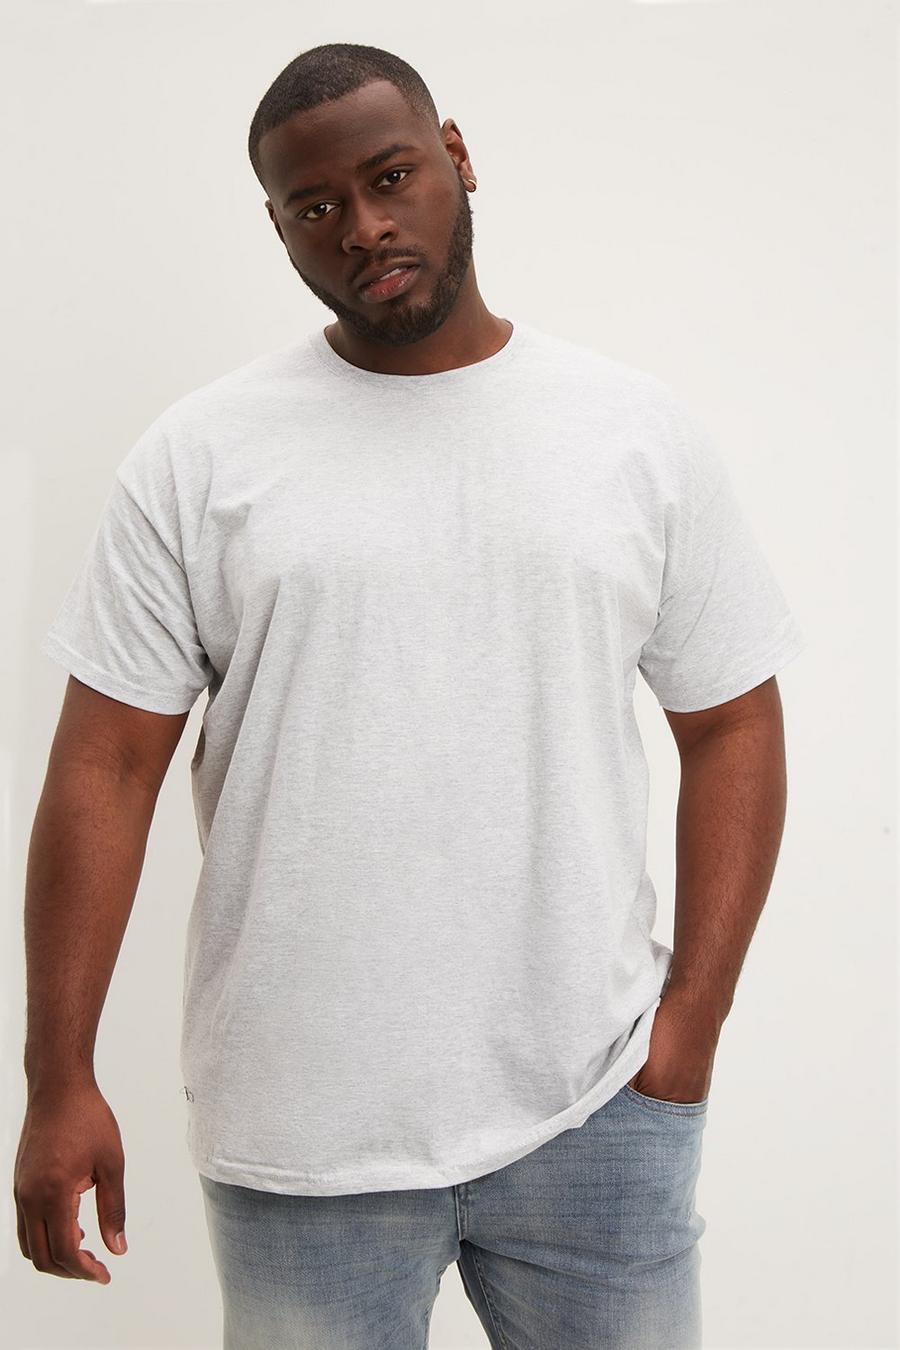 Plus And Tall Short Sleeve Basic Crew T-Shirt